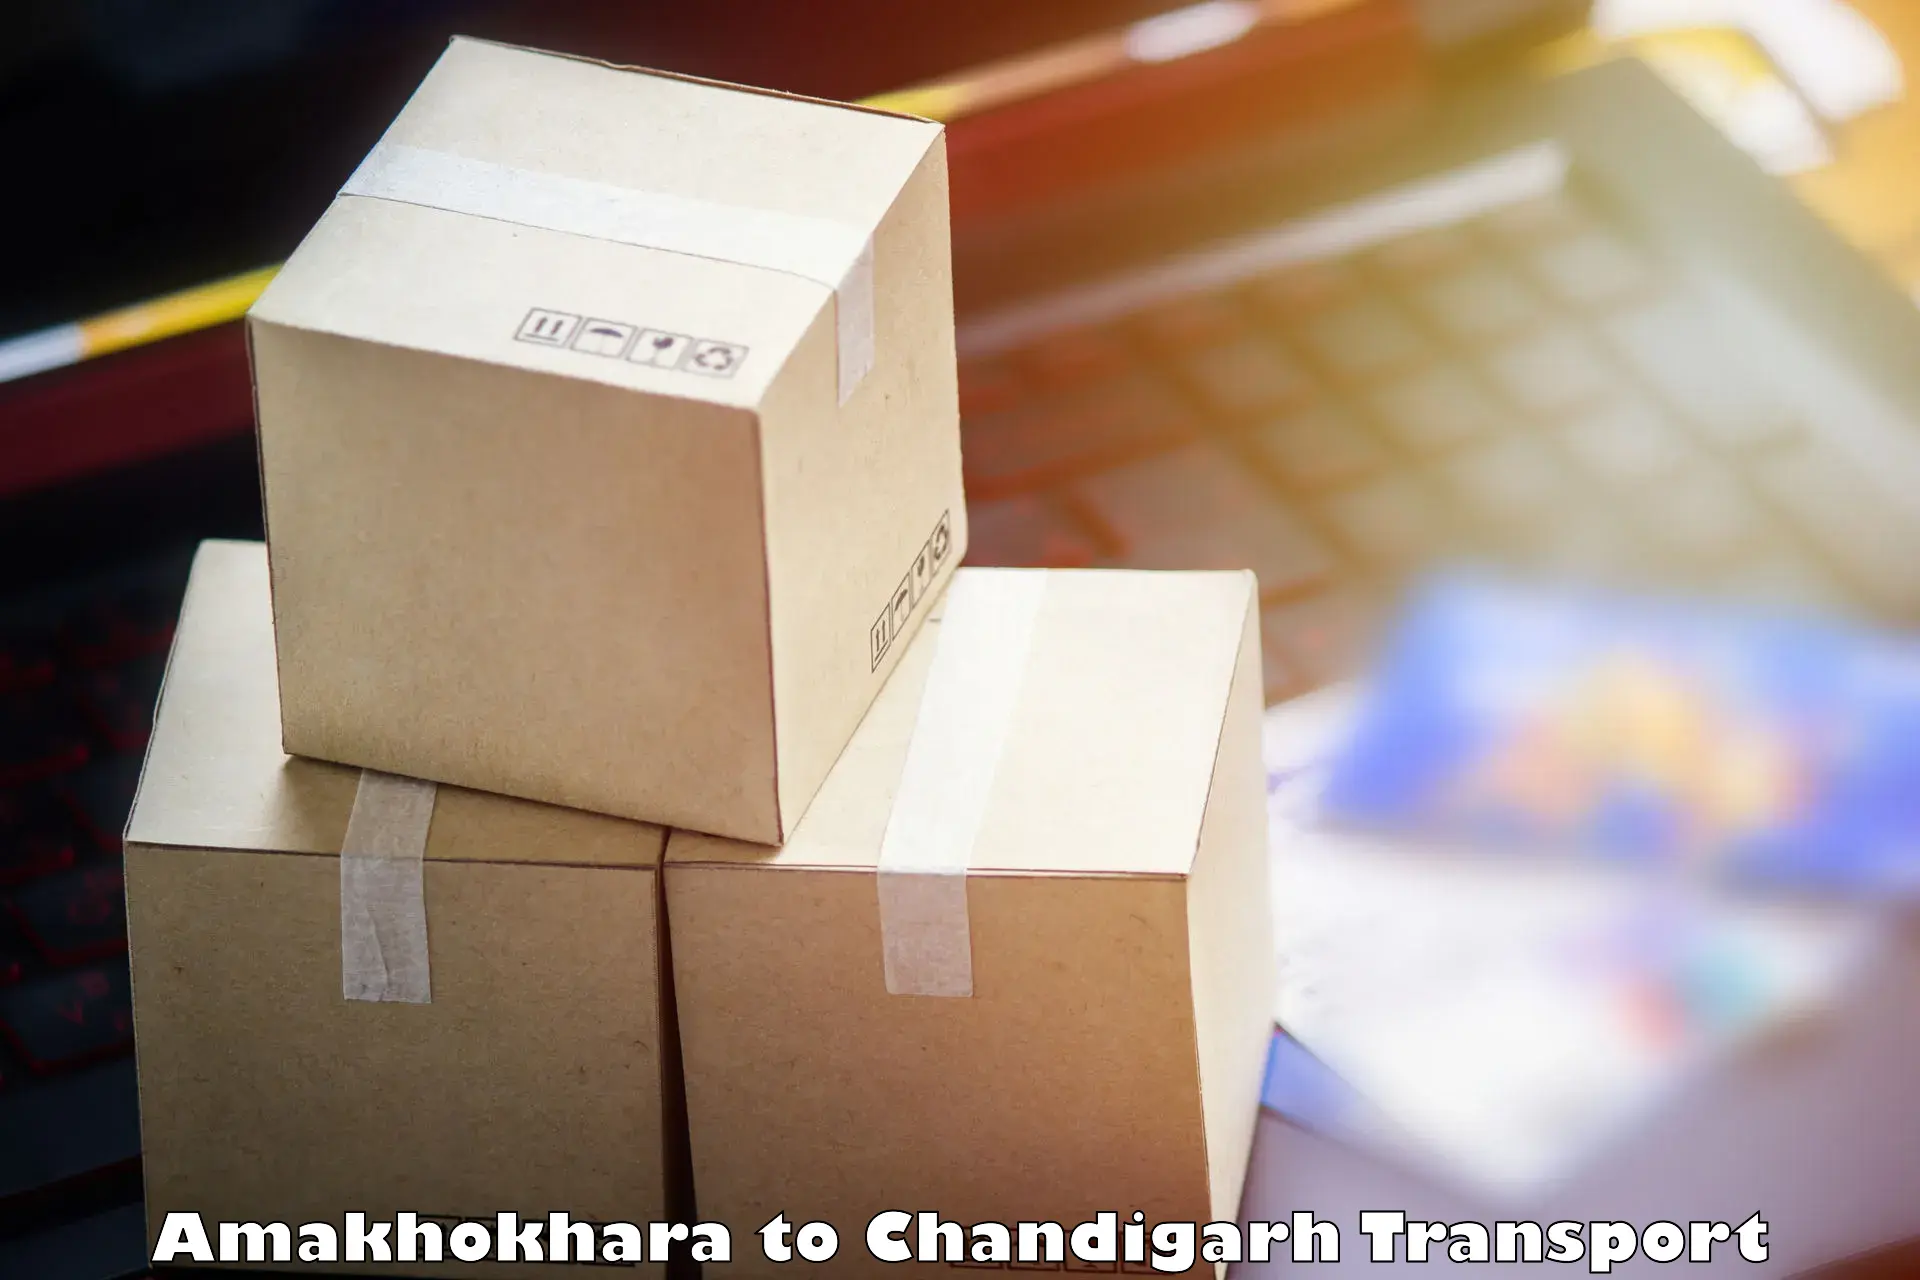 Shipping services in Amakhokhara to Chandigarh